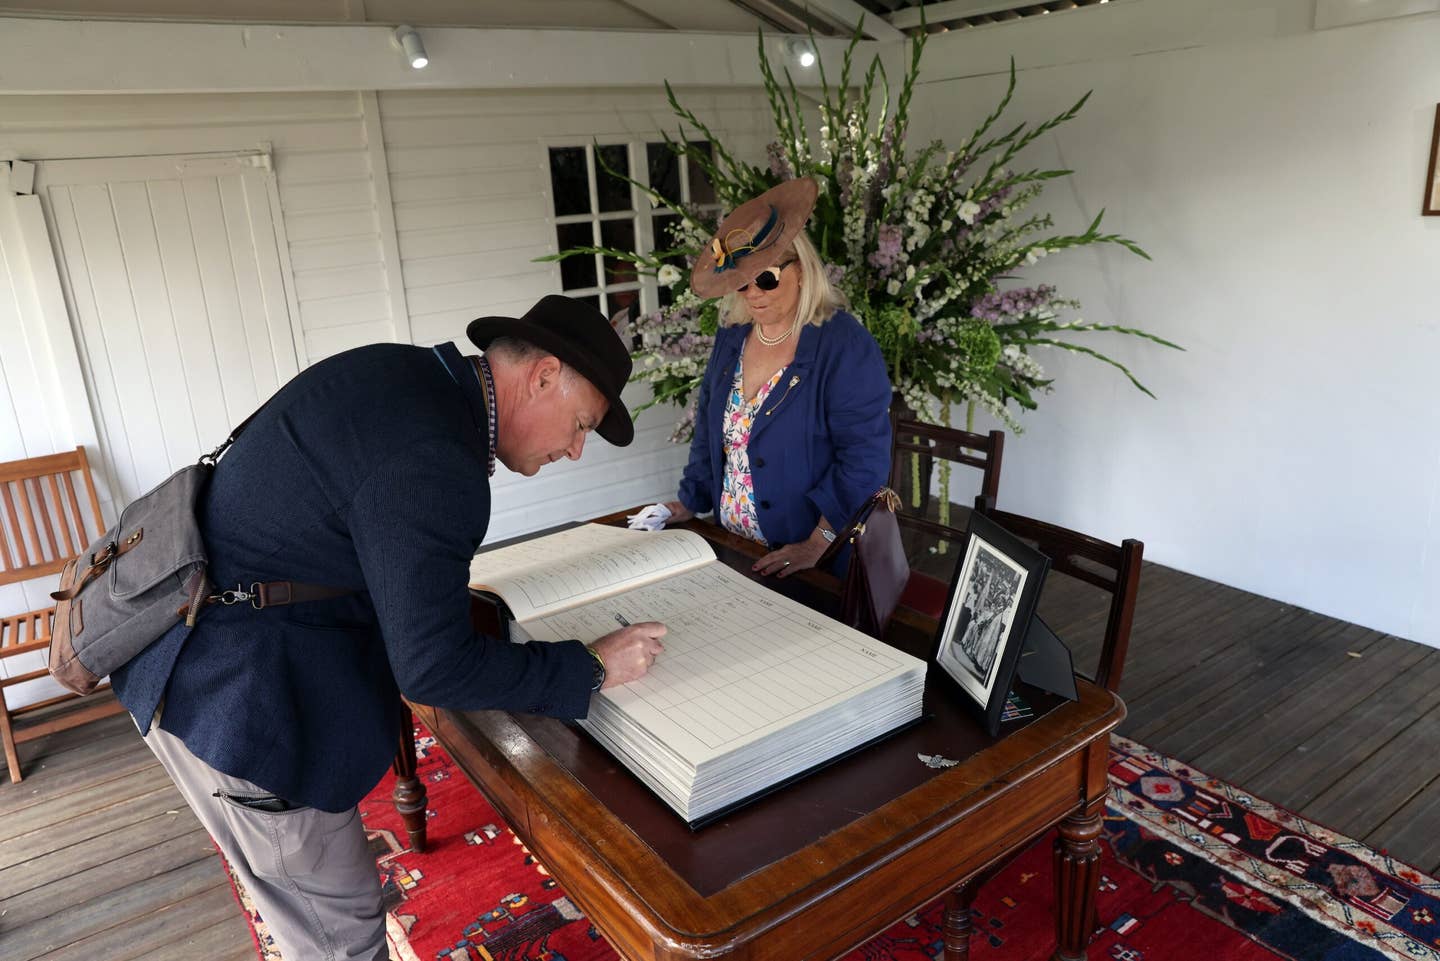 The book of condolences for Queen Elizabeth II is signed during the Goodwood Revival 2022 at Goodwood Motor Circuit in West Sussex. <em>Matt Alexander/PA Wire</em>